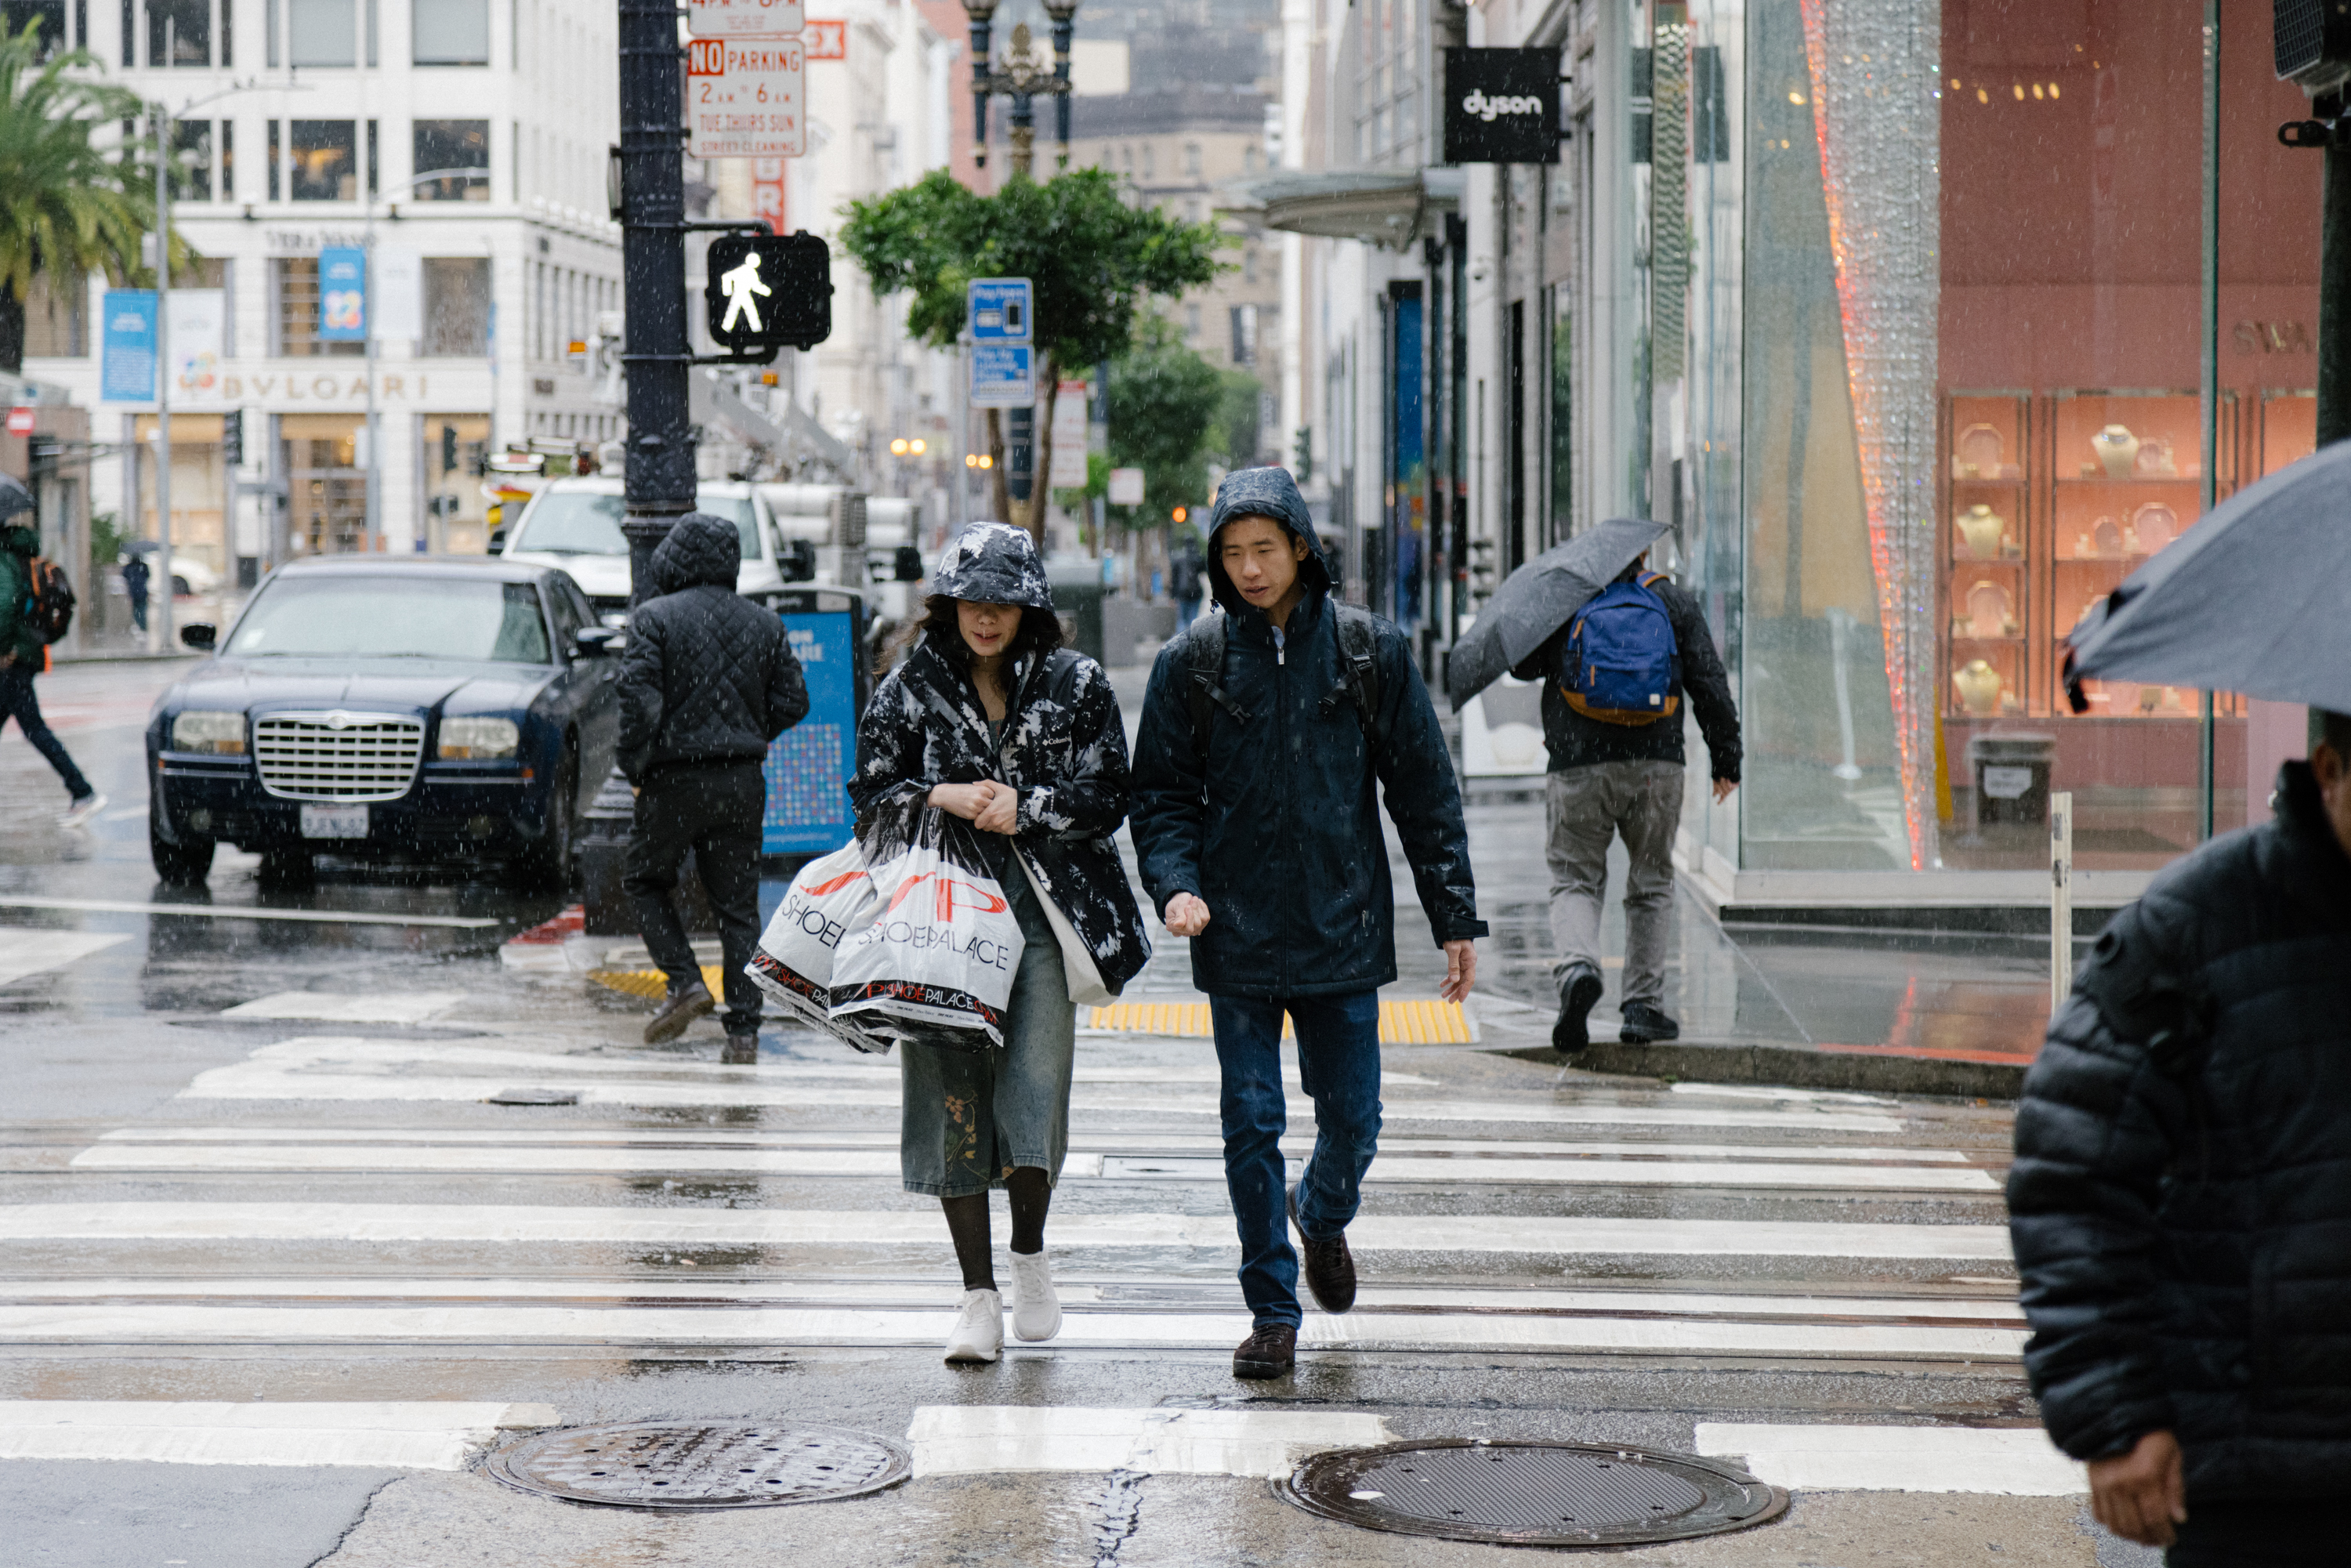 People in rain jackets and with umbrellas walk across wet street